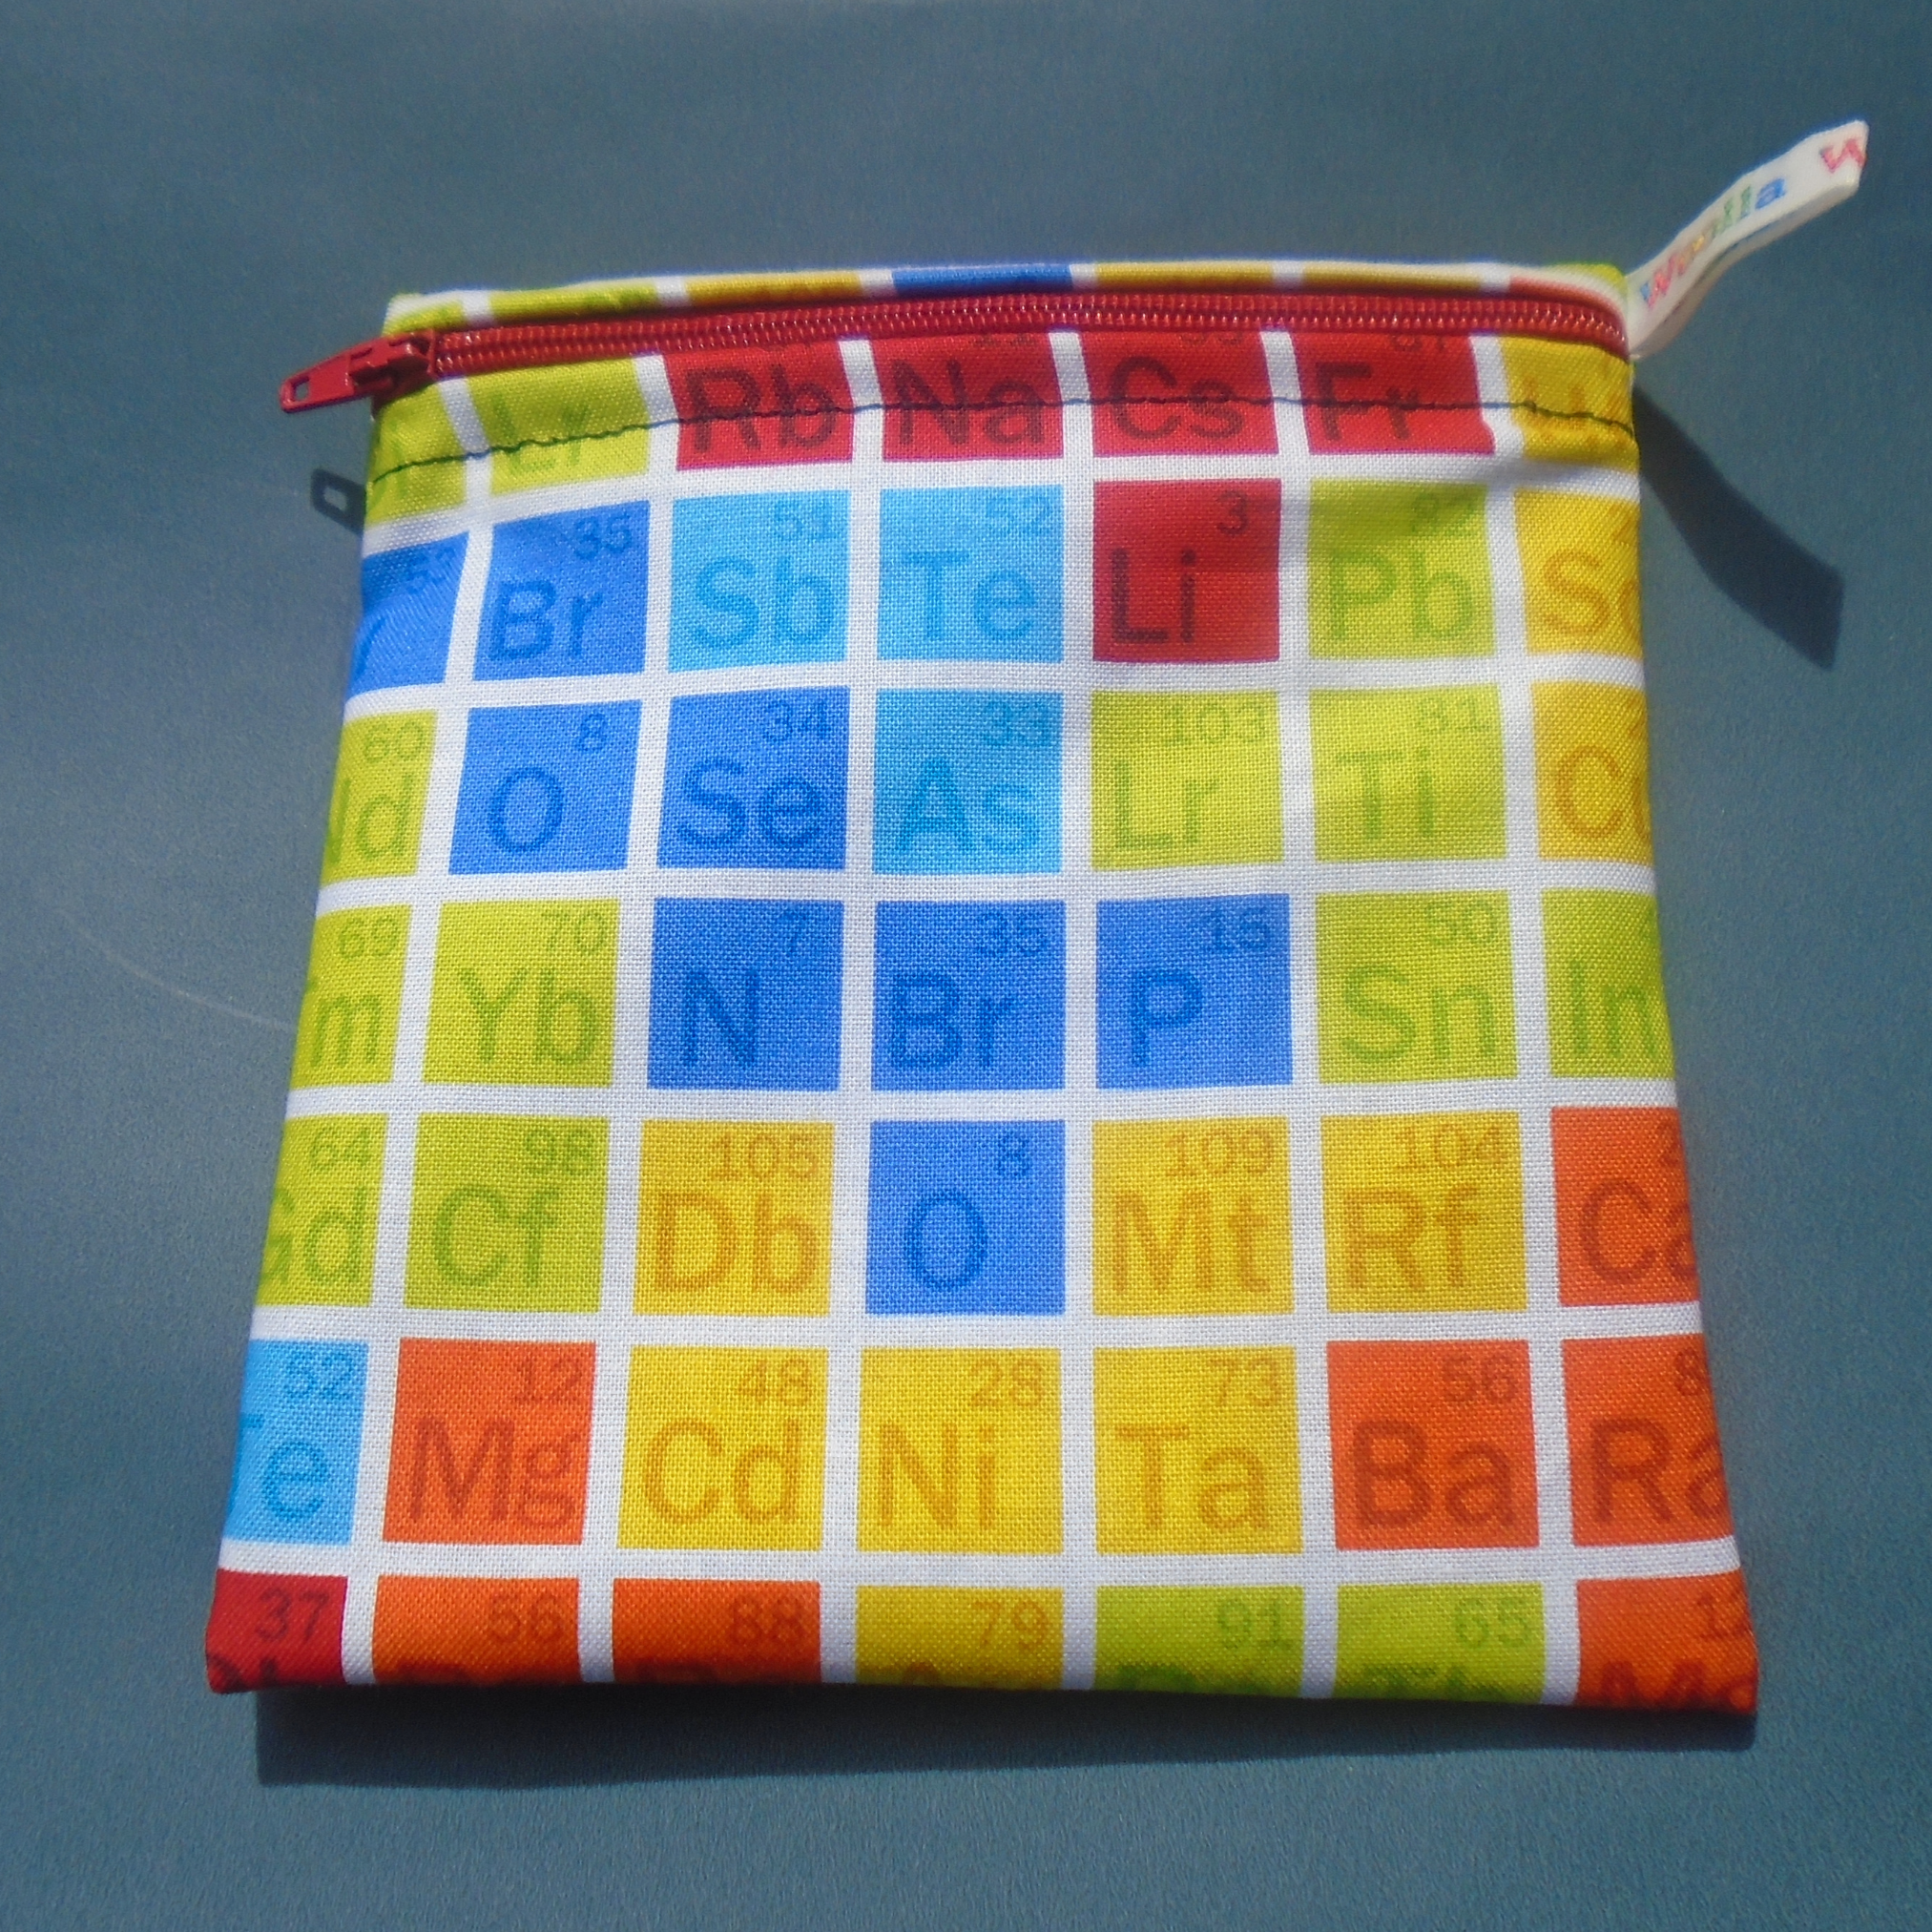 Multi Periodic Table - Small Poppins Pouch Washable Snack Bag